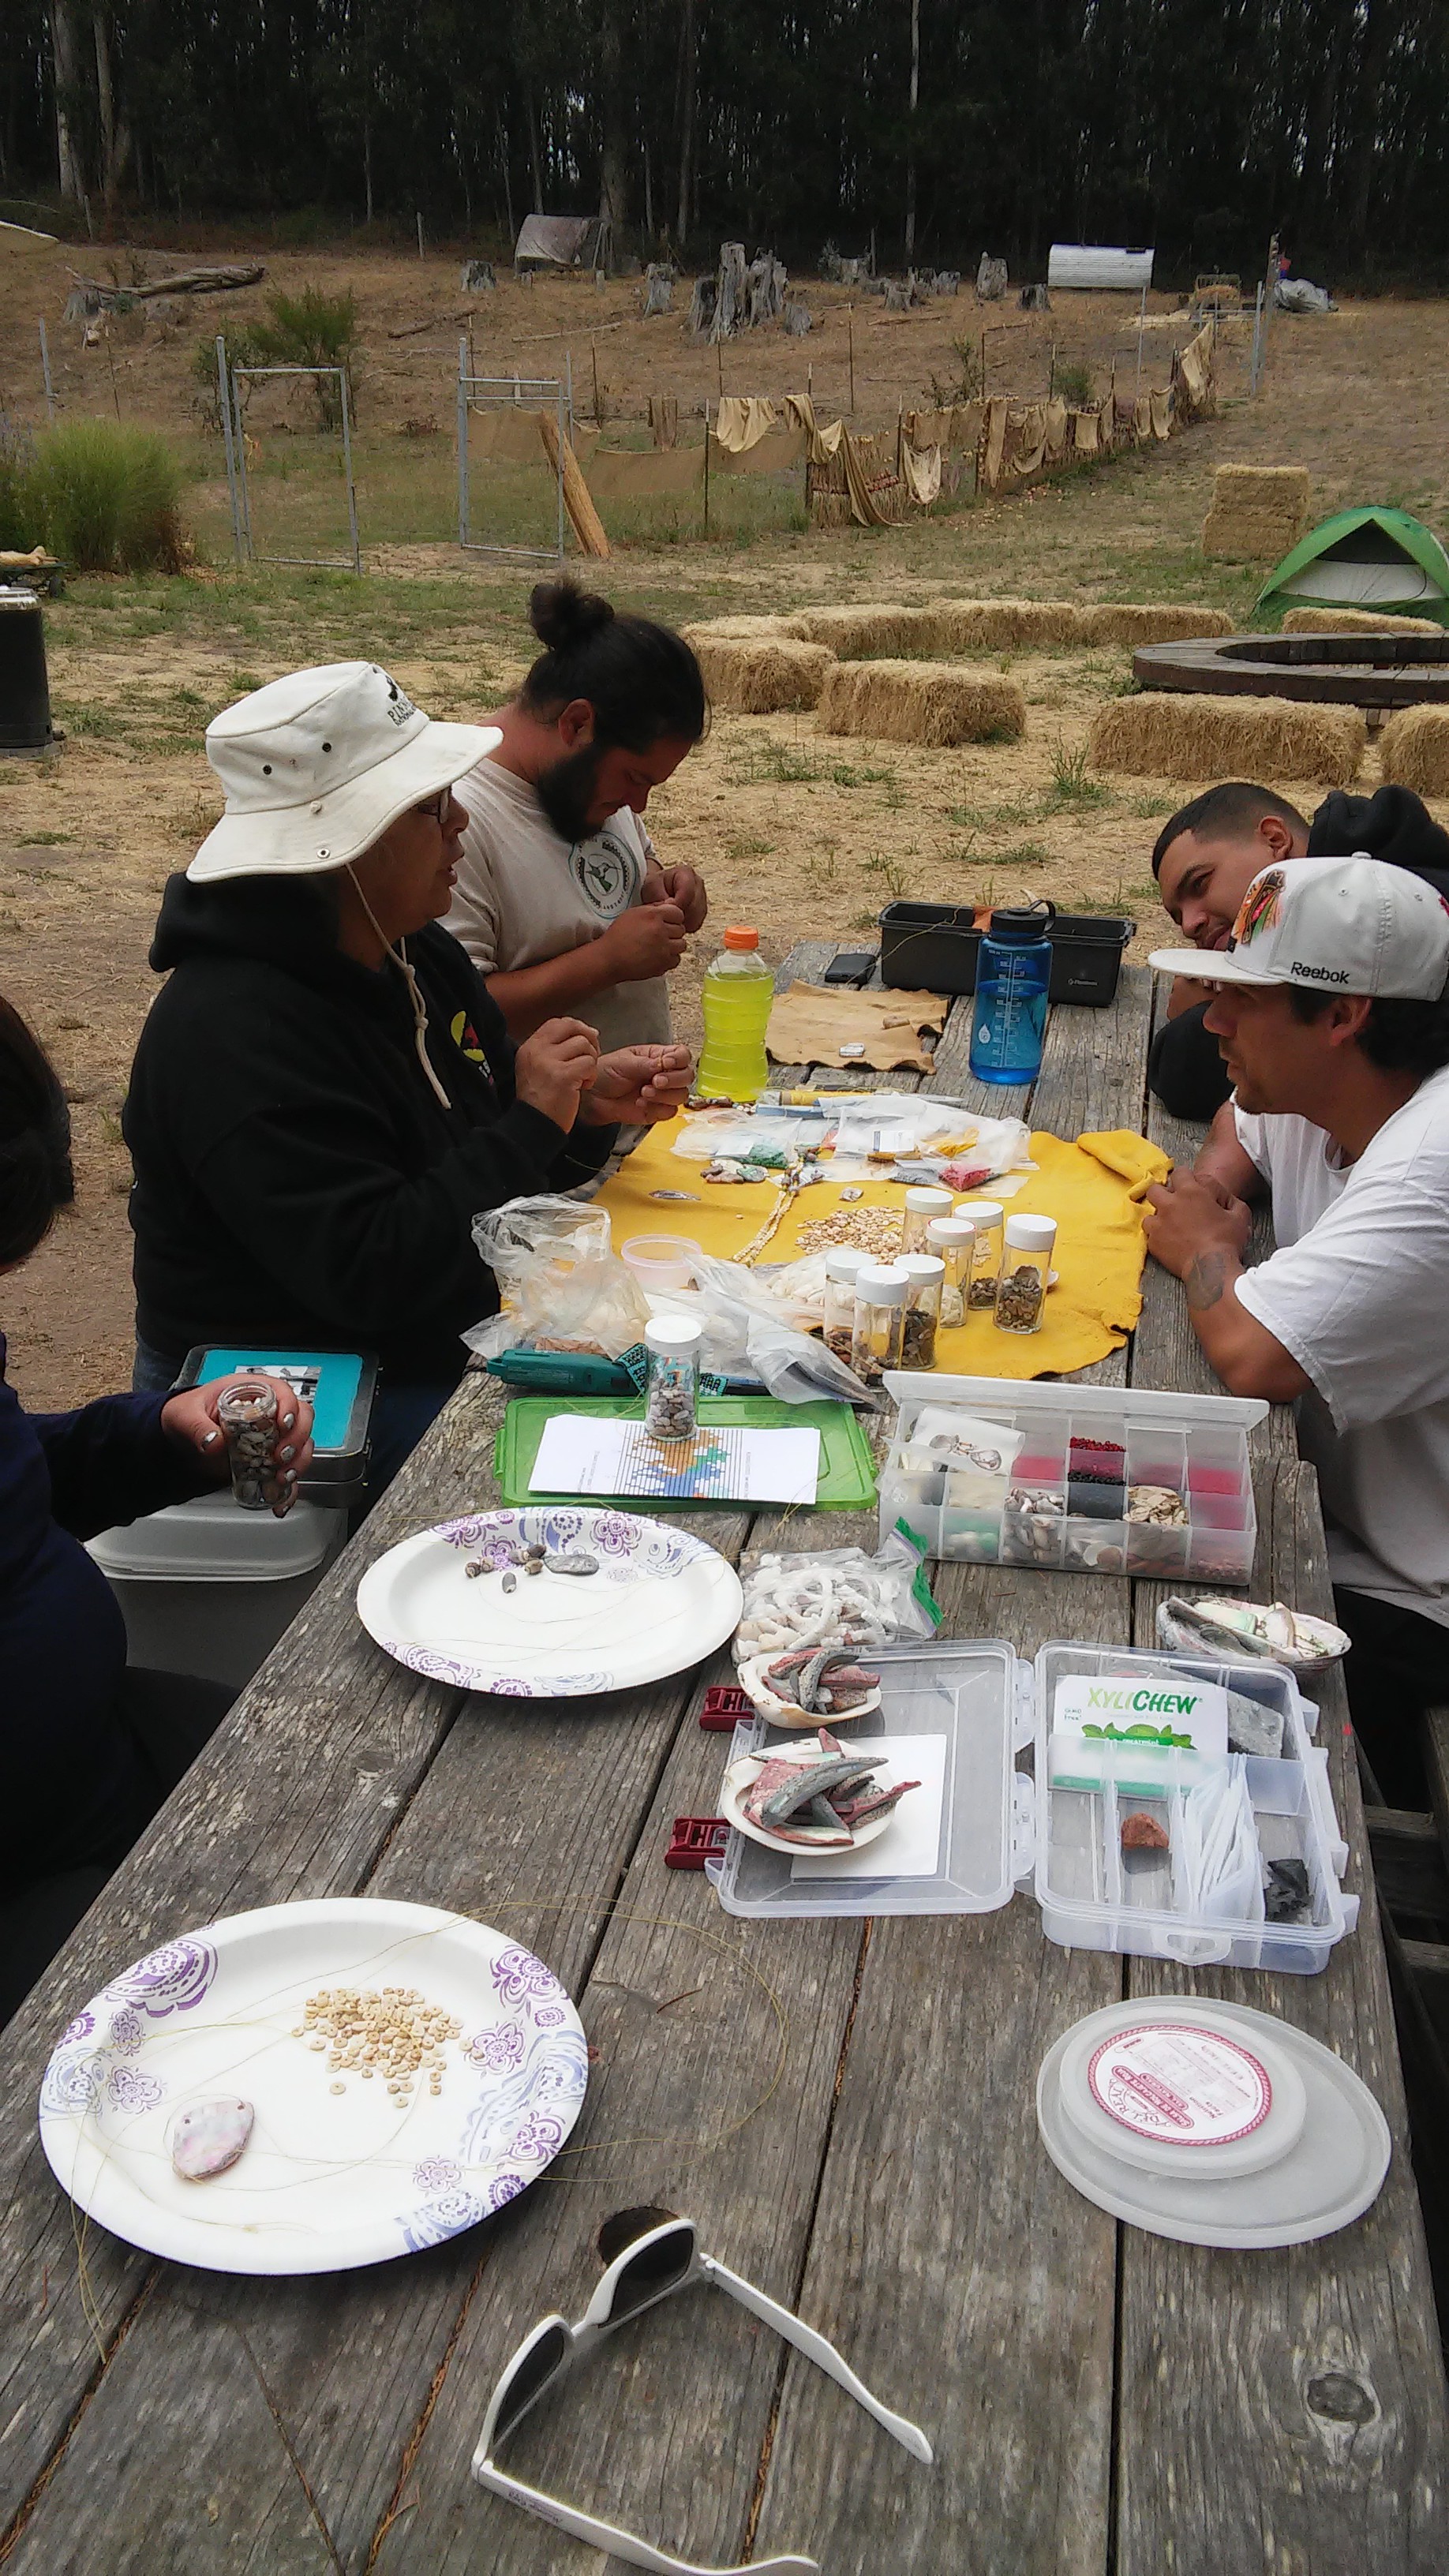 Tribal Elder Eleanor Castro leads a beading workshop with the Native Stewards. During NSC, the stewards participate in daily cultural and educational activities to strengthen a sense of Mutsun identity.